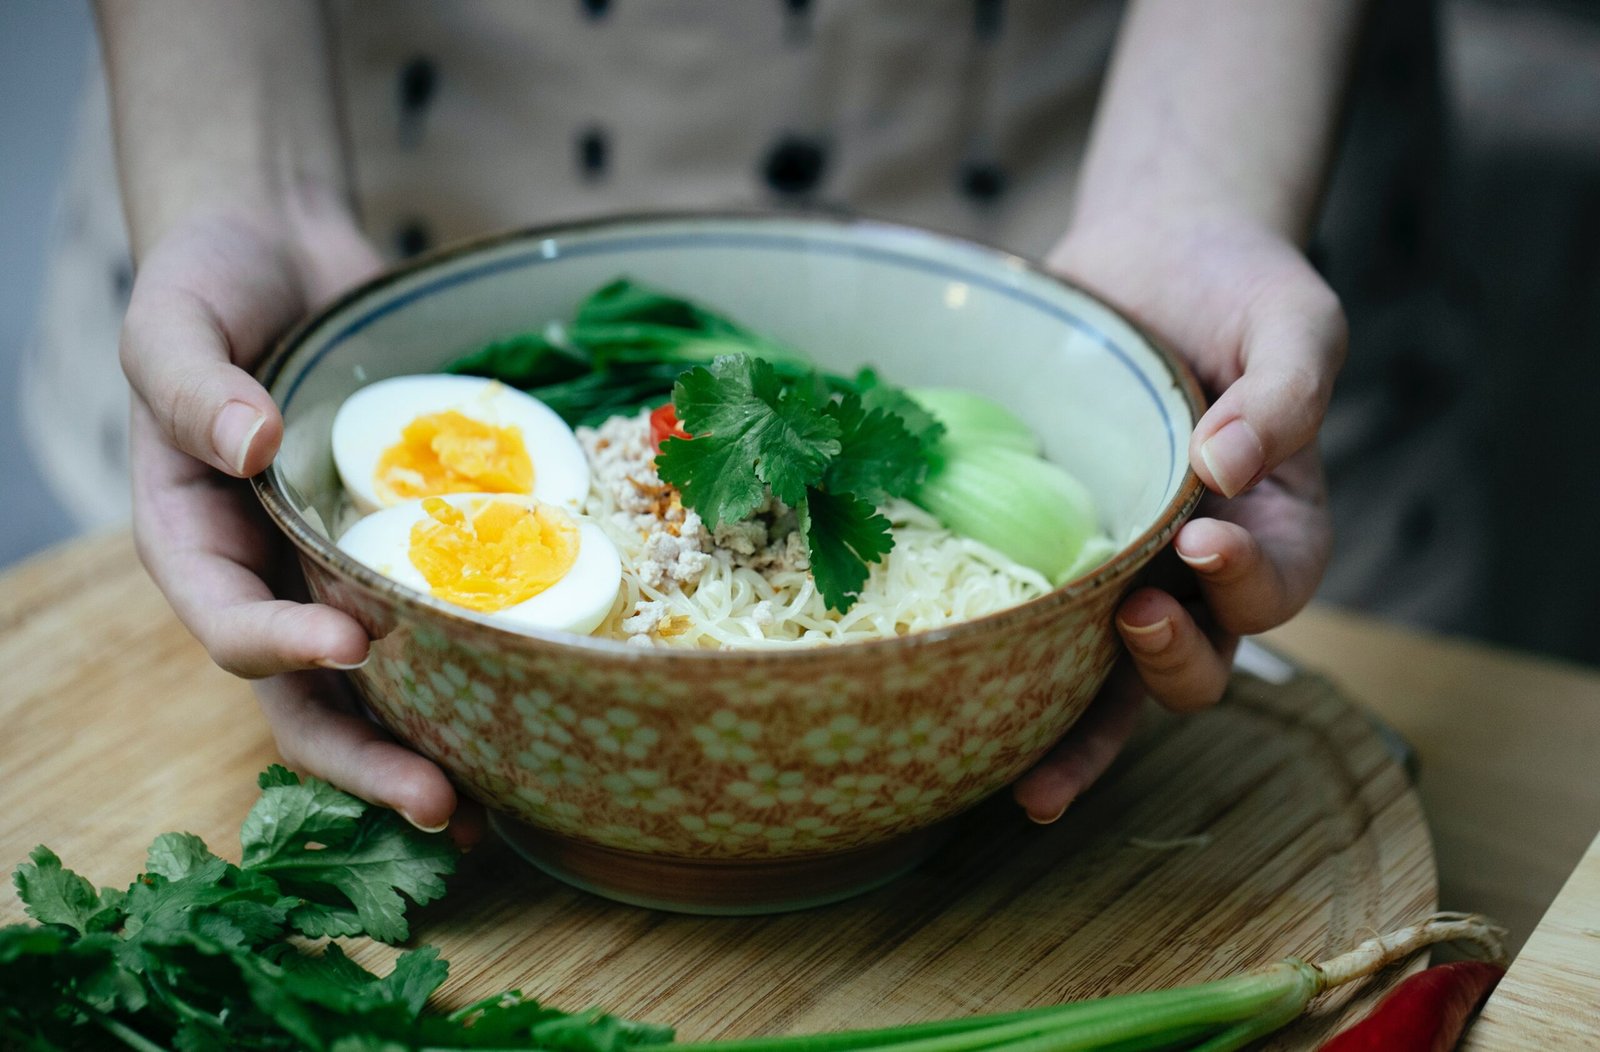 How Long Does It Take To Cook An Egg In Instant Ramen?